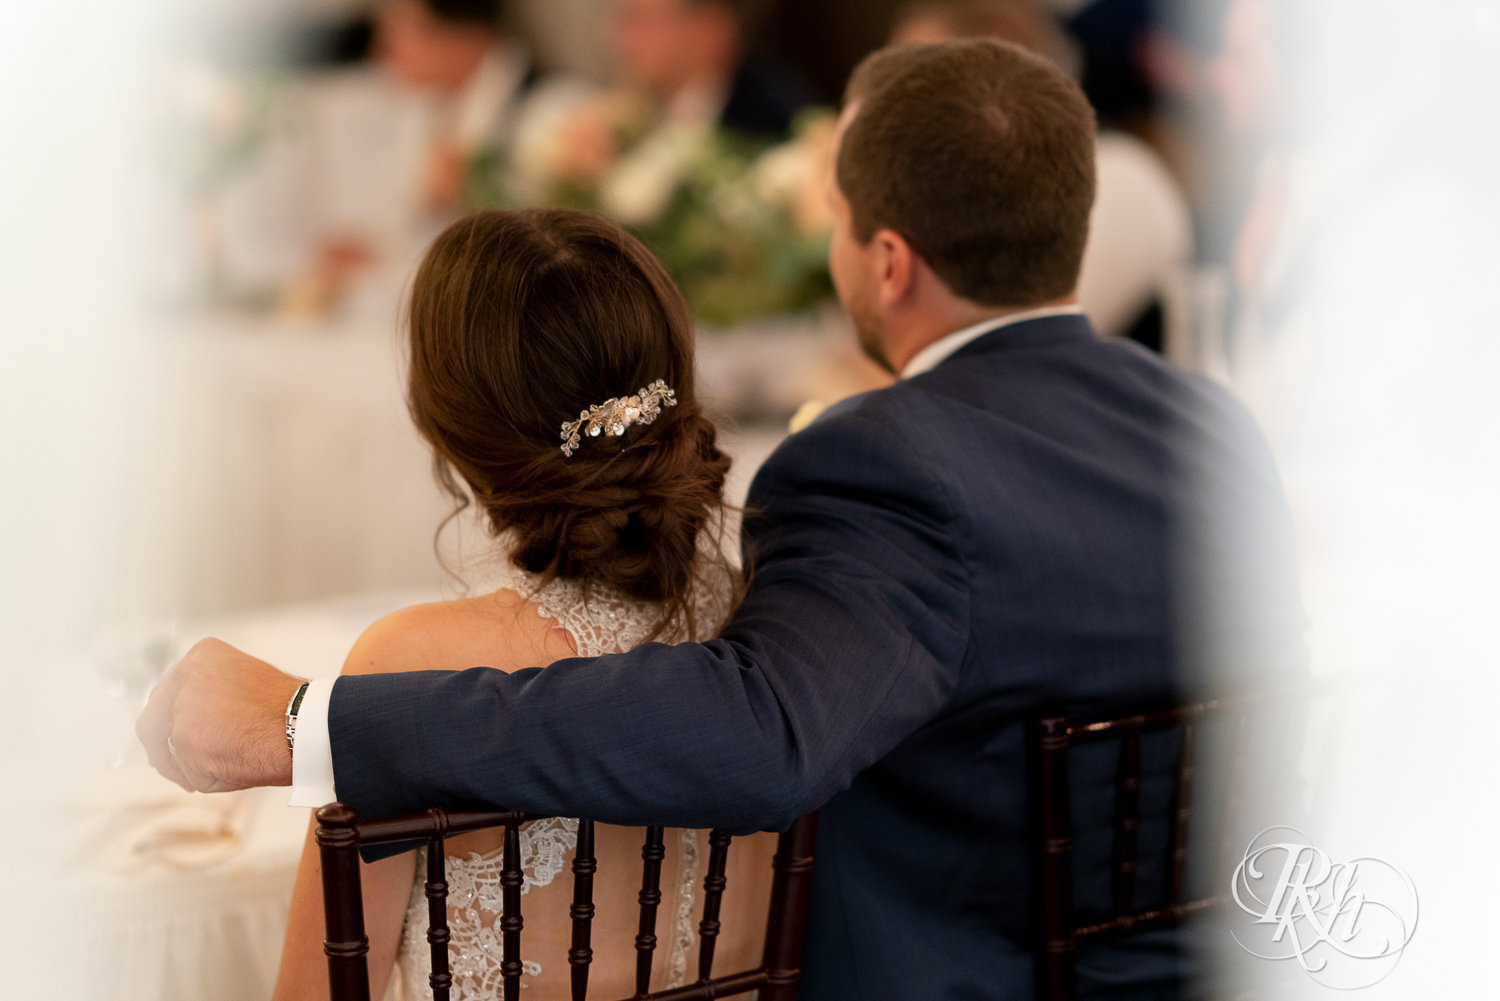 Groom wraps arm around bride during reception at The Chart House in Lakeville, Minnesota.